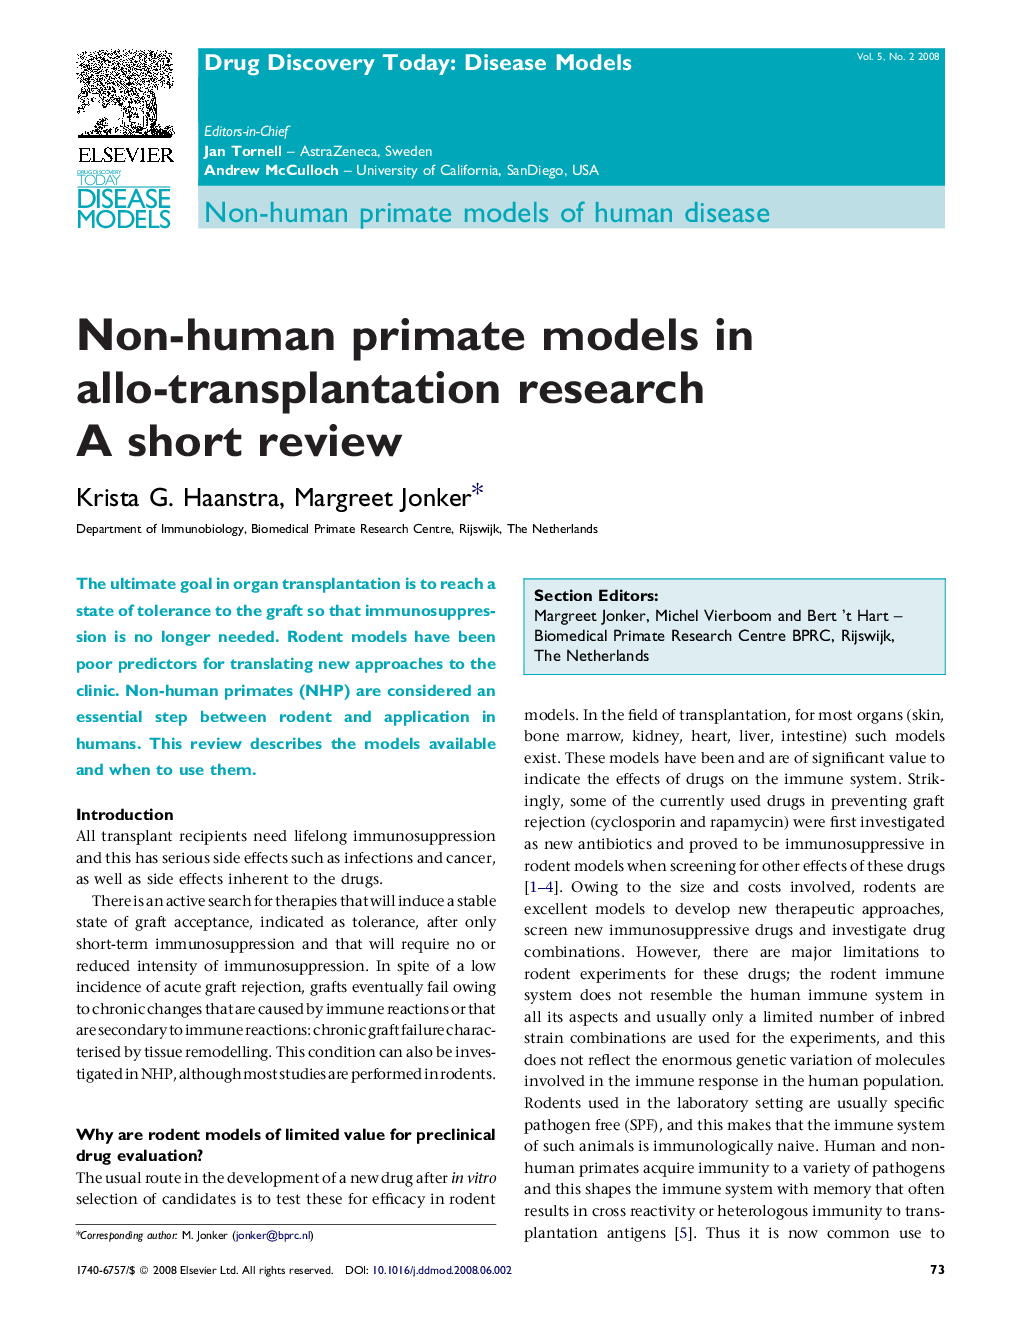 Non-human primate models in allo-transplantation research: A short review